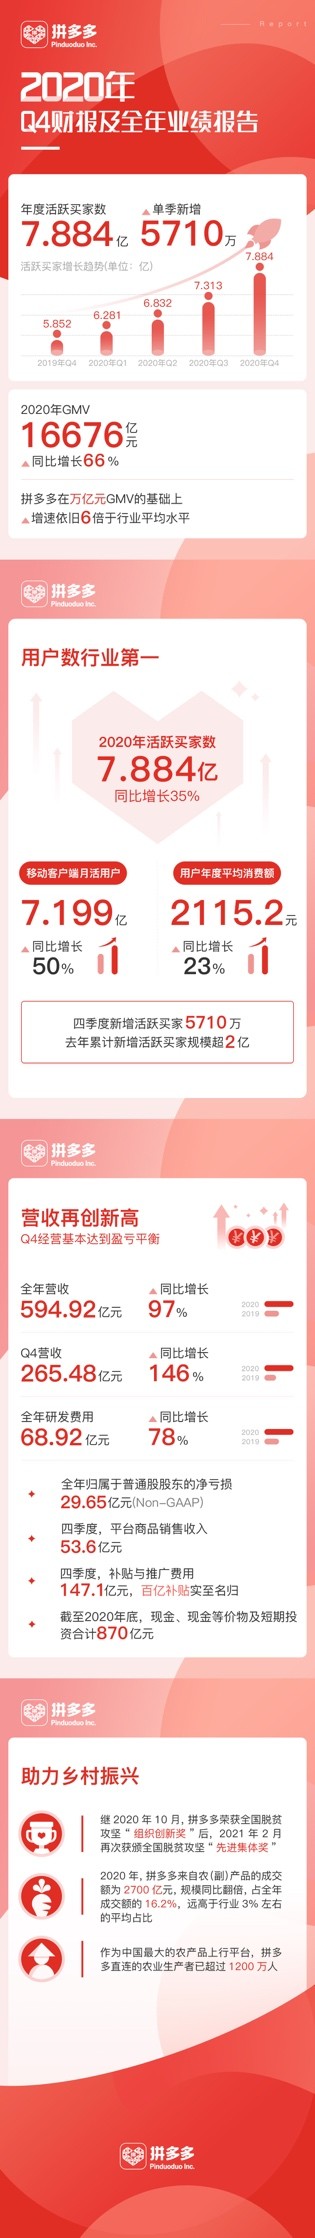 Pinduoduo has 788 million users, becoming the number one e-commerce company in China